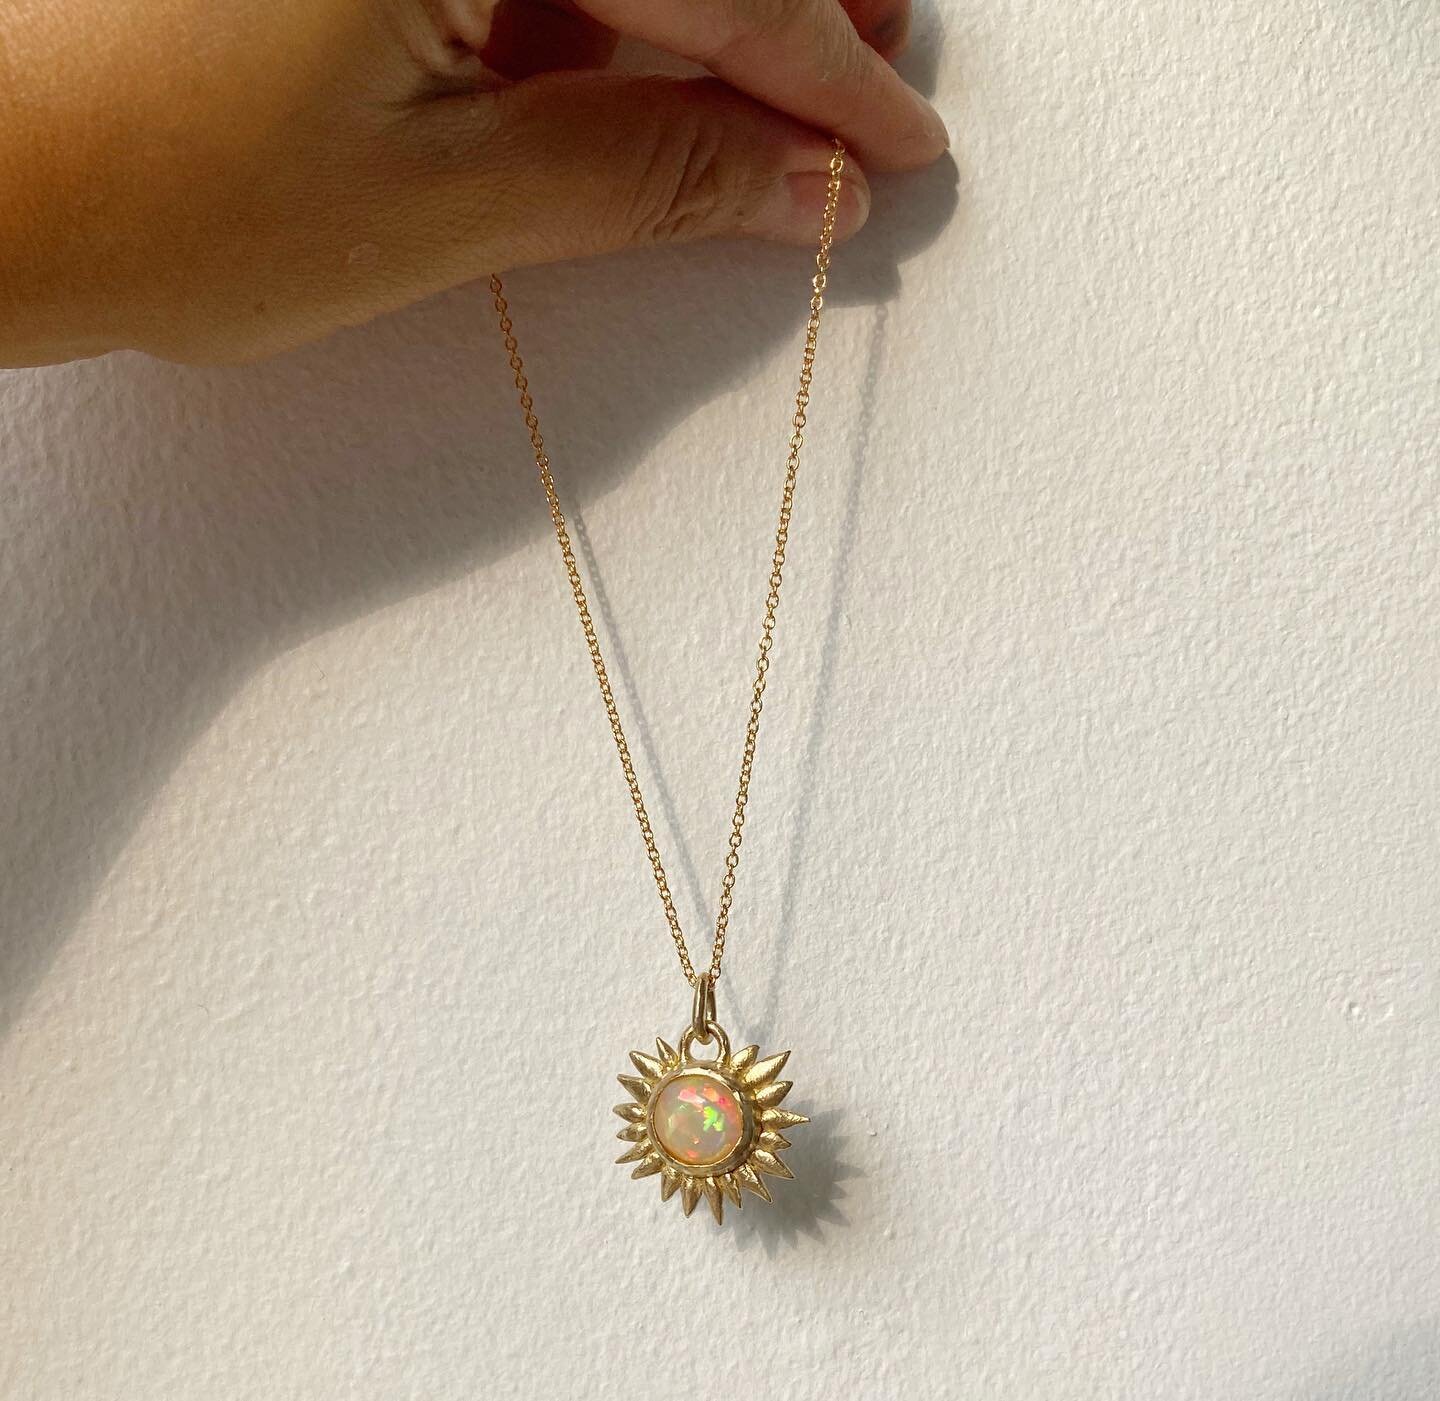 October is the month of opals! This stone is one of my very favourites, and I just can&rsquo;t get enough of the fire and flash🔥⚡️

We have some opals available at the moment, so please get in touch if you are interested in a custom piece!

#archera